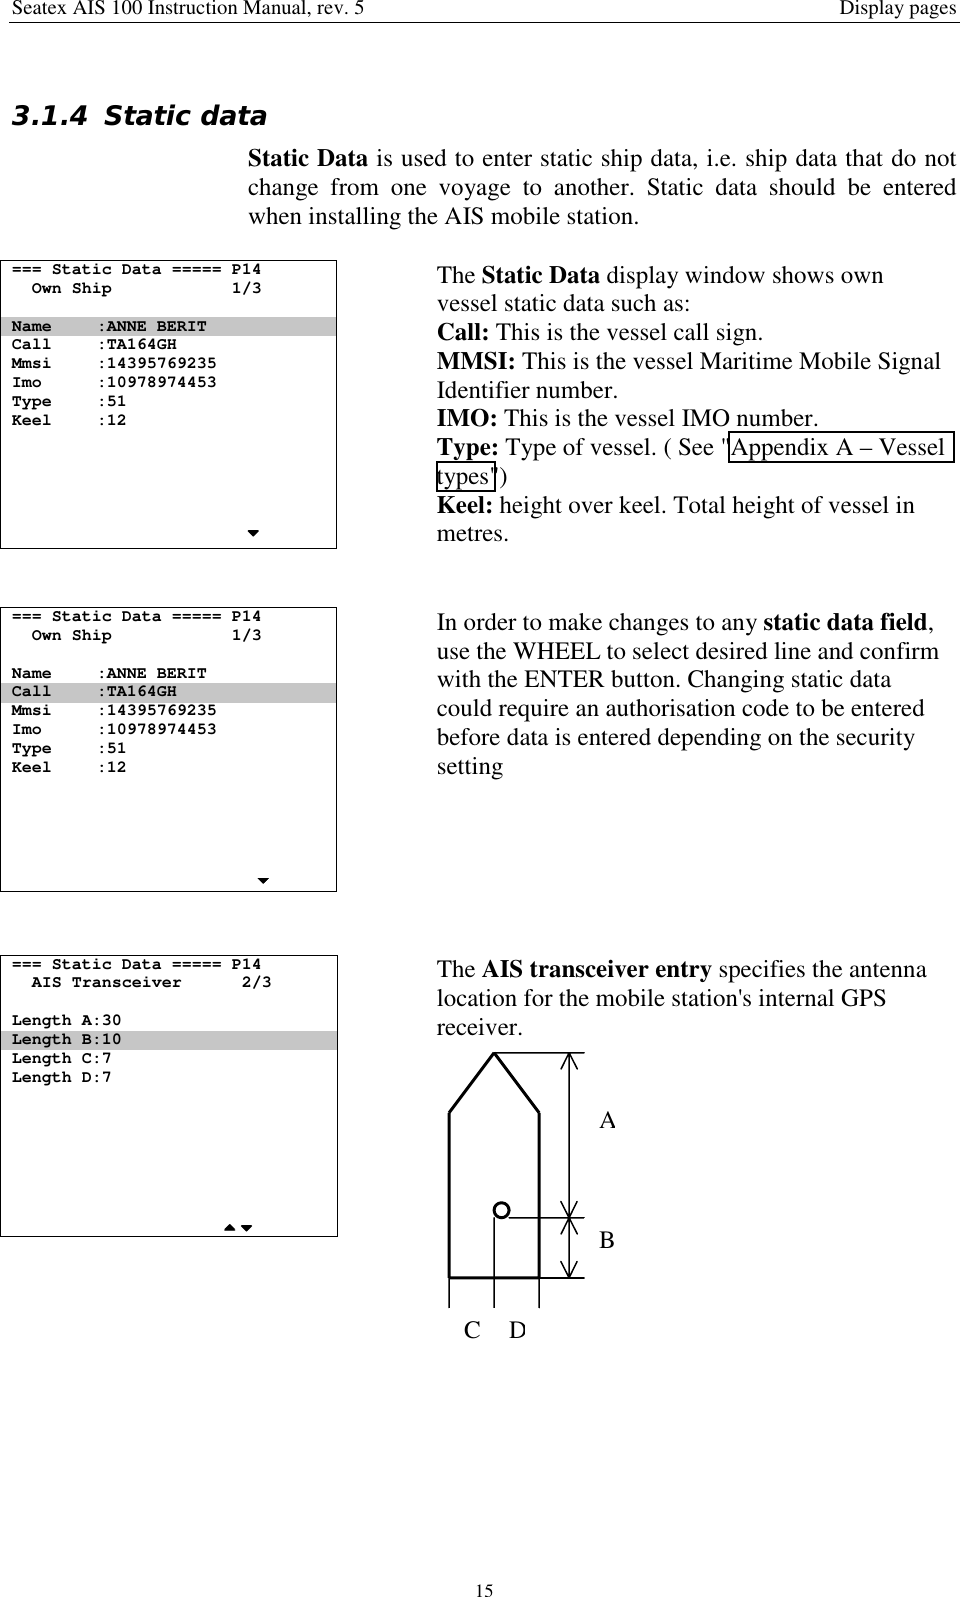 Seatex AIS 100 Instruction Manual, rev. 5 Display pages153.1.4 Static dataStatic Data is used to enter static ship data, i.e. ship data that do notchange from one voyage to another. Static data should be enteredwhen installing the AIS mobile station.=== Static Data ===== P14Own Ship 1/3Name :ANNE BERITCall :TA164GHMmsi :14395769235Imo :10978974453Type :51Keel :12The Static Data display window shows ownvessel static data such as:Call: This is the vessel call sign.MMSI: This is the vessel Maritime Mobile SignalIdentifier number.IMO: This is the vessel IMO number.Type: Type of vessel. ( See &quot;Appendix A – Vesseltypes&quot;)Keel: height over keel. Total height of vessel inmetres.=== Static Data ===== P14Own Ship 1/3Name :ANNE BERITCall :TA164GHMmsi :14395769235Imo :10978974453Type :51Keel :12In order to make changes to any static data field,use the WHEEL to select desired line and confirmwith the ENTER button. Changing static datacould require an authorisation code to be enteredbefore data is entered depending on the securitysetting=== Static Data ===== P14AIS Transceiver 2/3Length A:30Length B:10Length C:7Length D:7The AIS transceiver entry specifies the antennalocation for the mobile station&apos;s internal GPSreceiver.ABCD